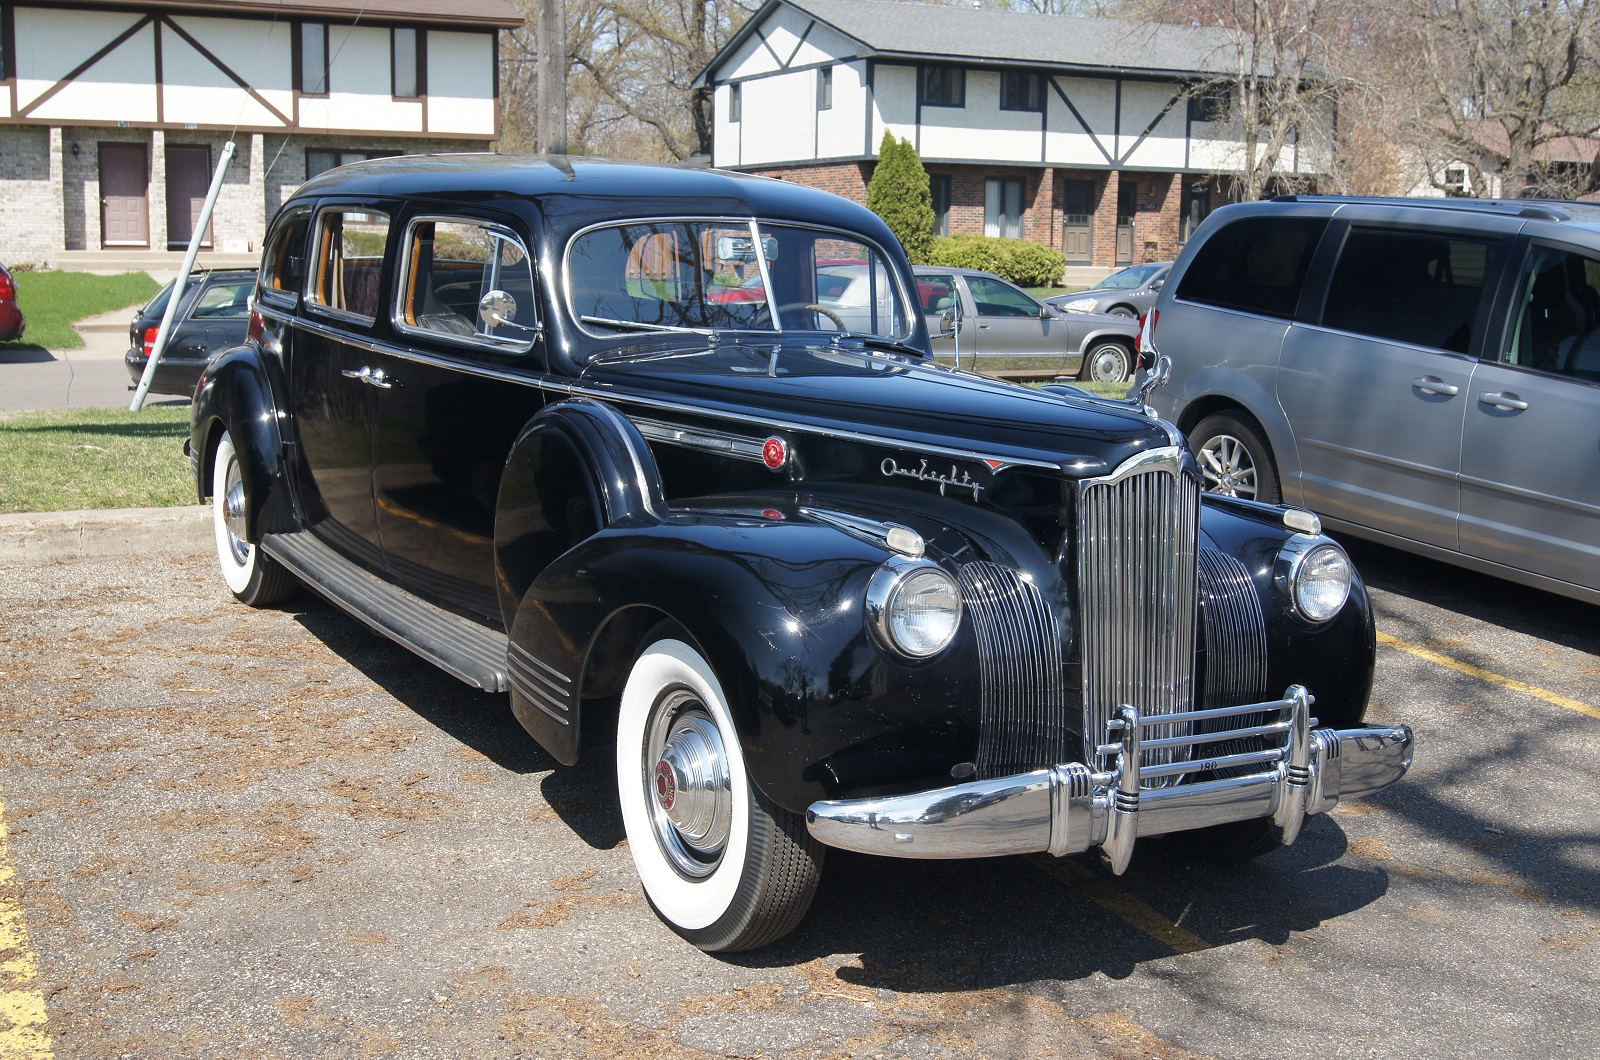 <p>The <strong>Packard Super Eight One-Eighty</strong> became the first series-produced car equipped with power windows when it made its debut. Called Automatic Window Control, it was hydraulically operated. The model just beat Lincoln, whose 1941 Continental included vacuum-operated power windows.</p><p>The Packard system used brake fluid to move the windows up and down. It was slow and prone to damaging leaks when not properly maintained. A huge and very primitive air conditioning system also made its debut as an option on this truly groundbreaking car.</p><p><strong>GROUNDBREAKER SCORE: 7 </strong>– important, but not the end of the tale as you’ll see…</p>